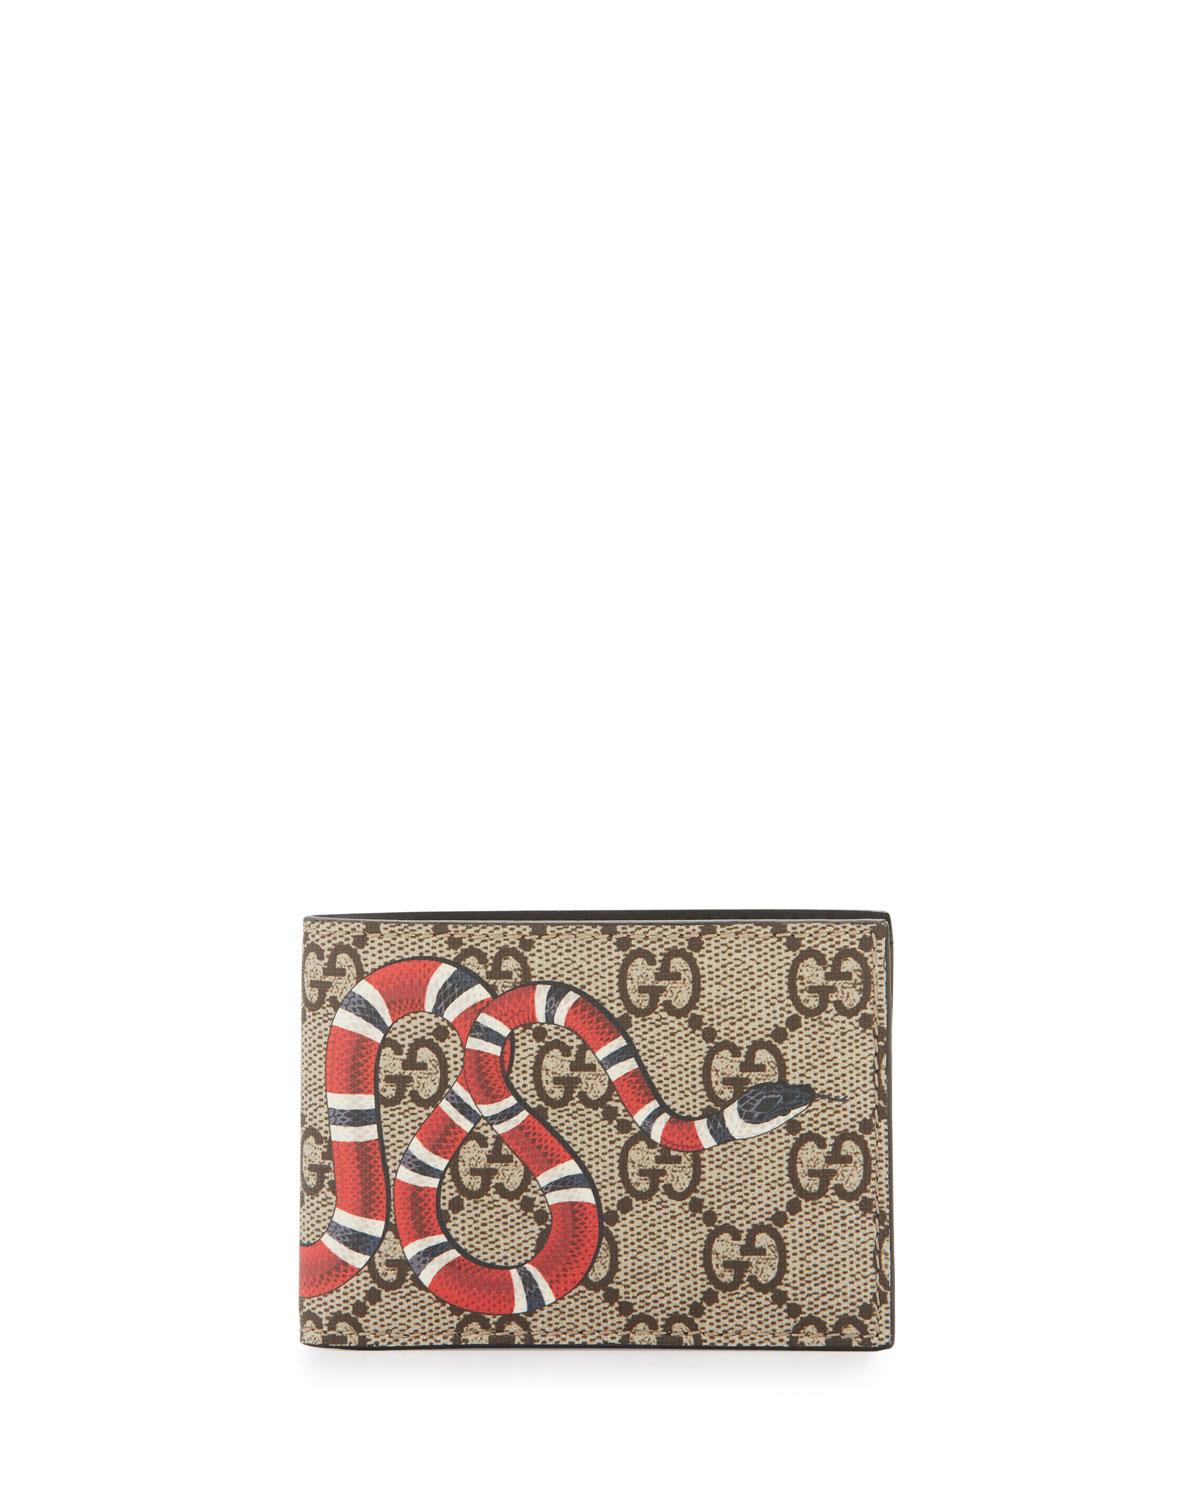 Gucci Bestiary Snake-print Gg Supreme Wallet in Natural for Men | Lyst